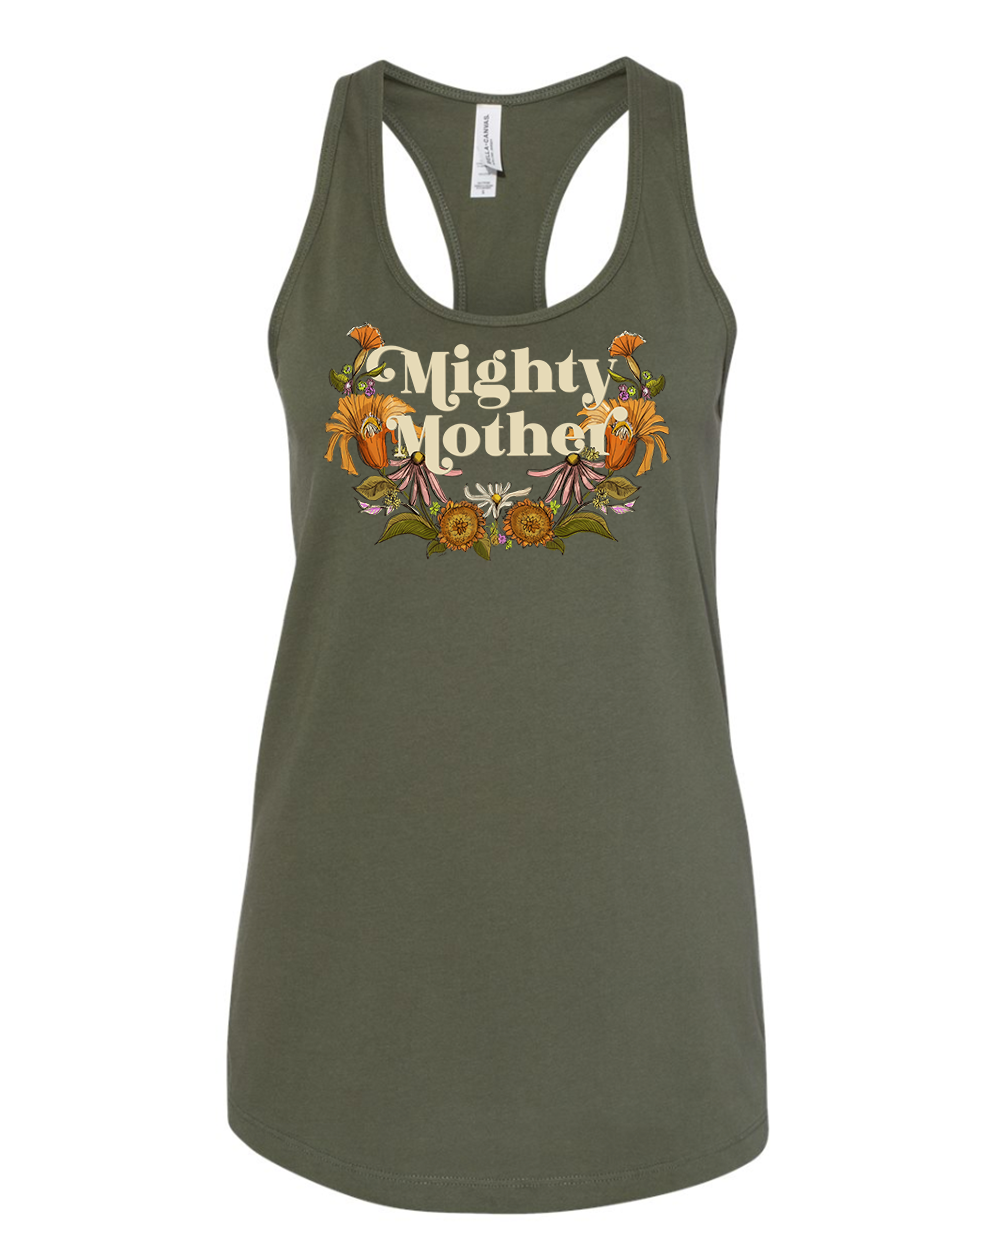 Mighty Mother - Racerback Ladies Tank Top - [Military Green] READY TO SHIP